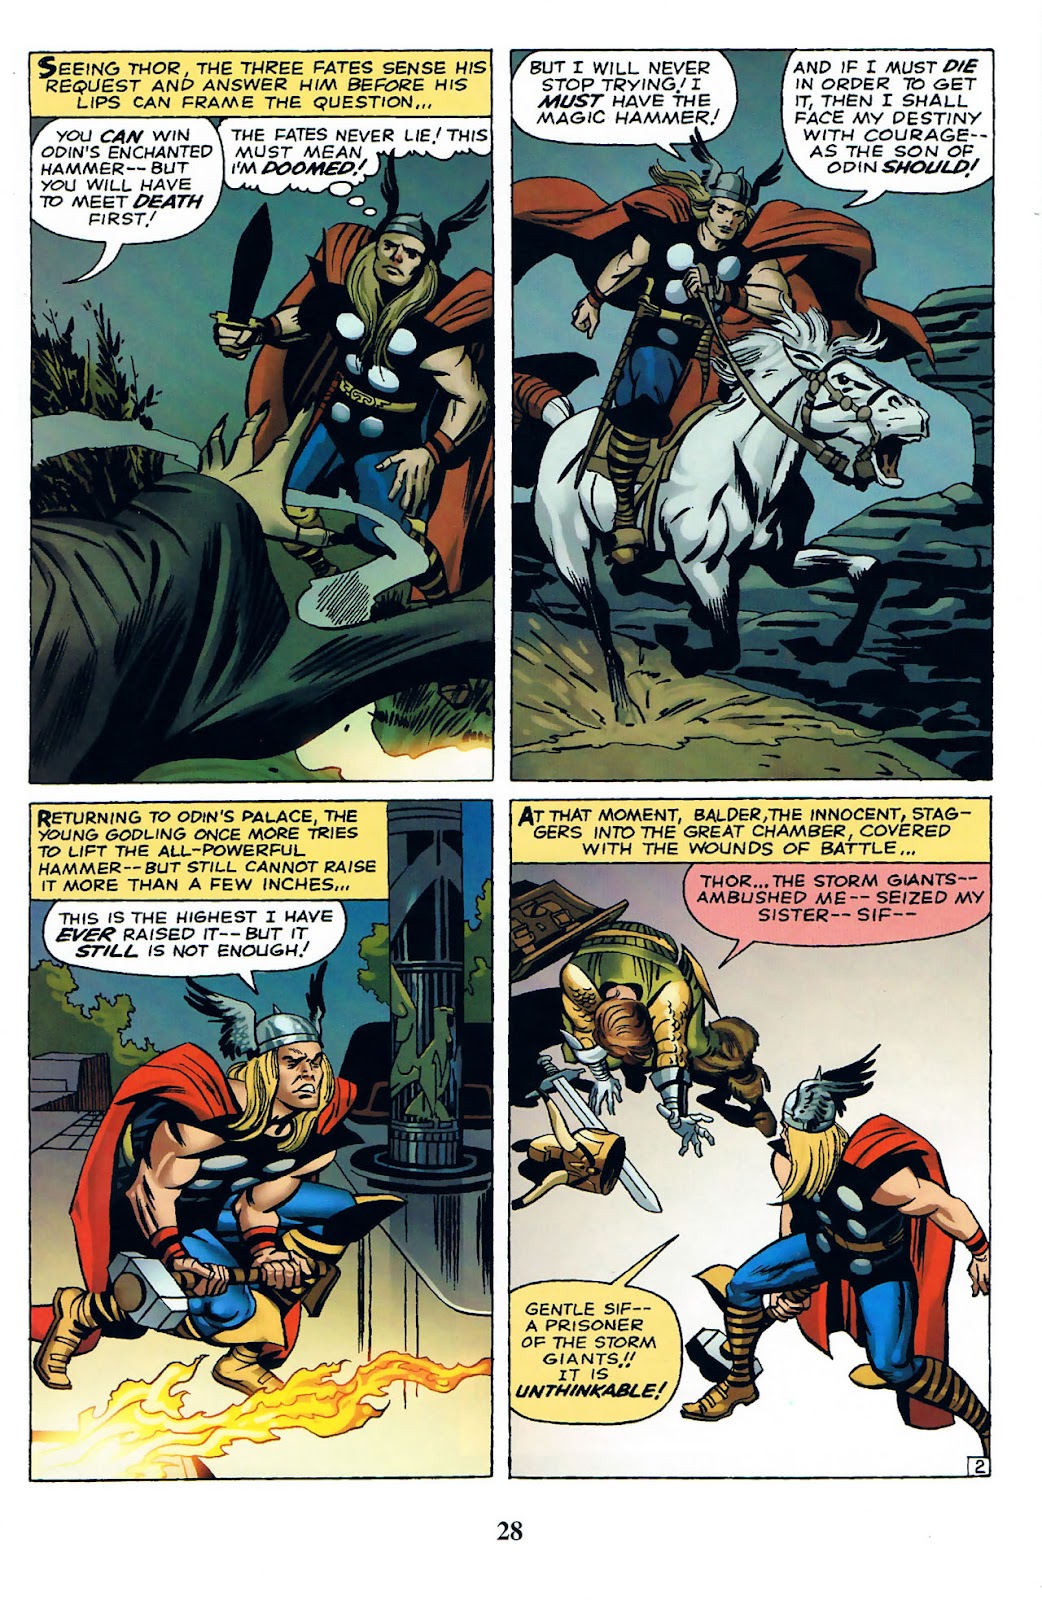 Thor: Tales of Asgard by Stan Lee & Jack Kirby issue 1 - Page 30